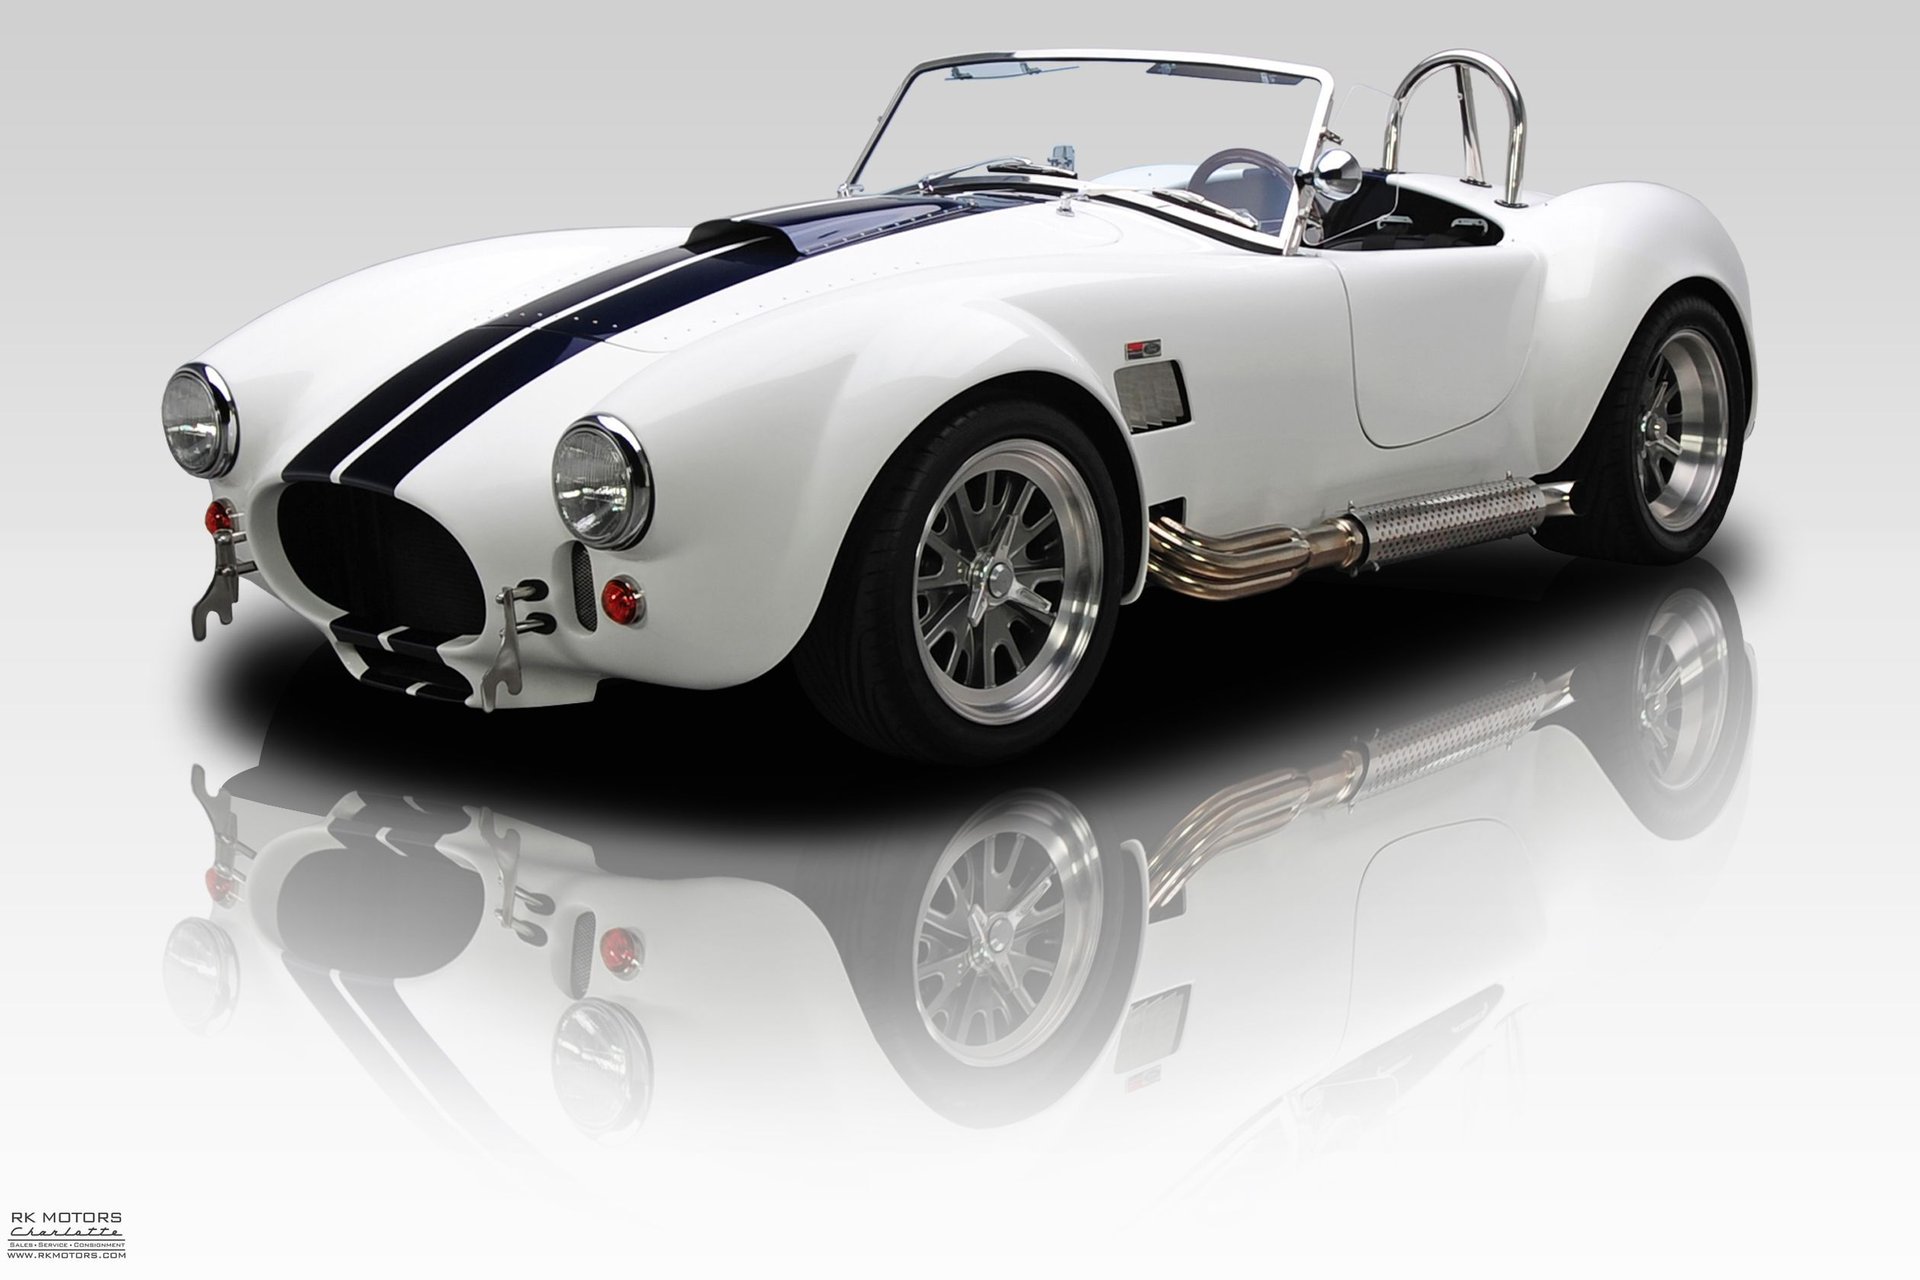 133217 1965 Shelby Cobra RK Motors Classic Cars and Muscle Cars for Sale